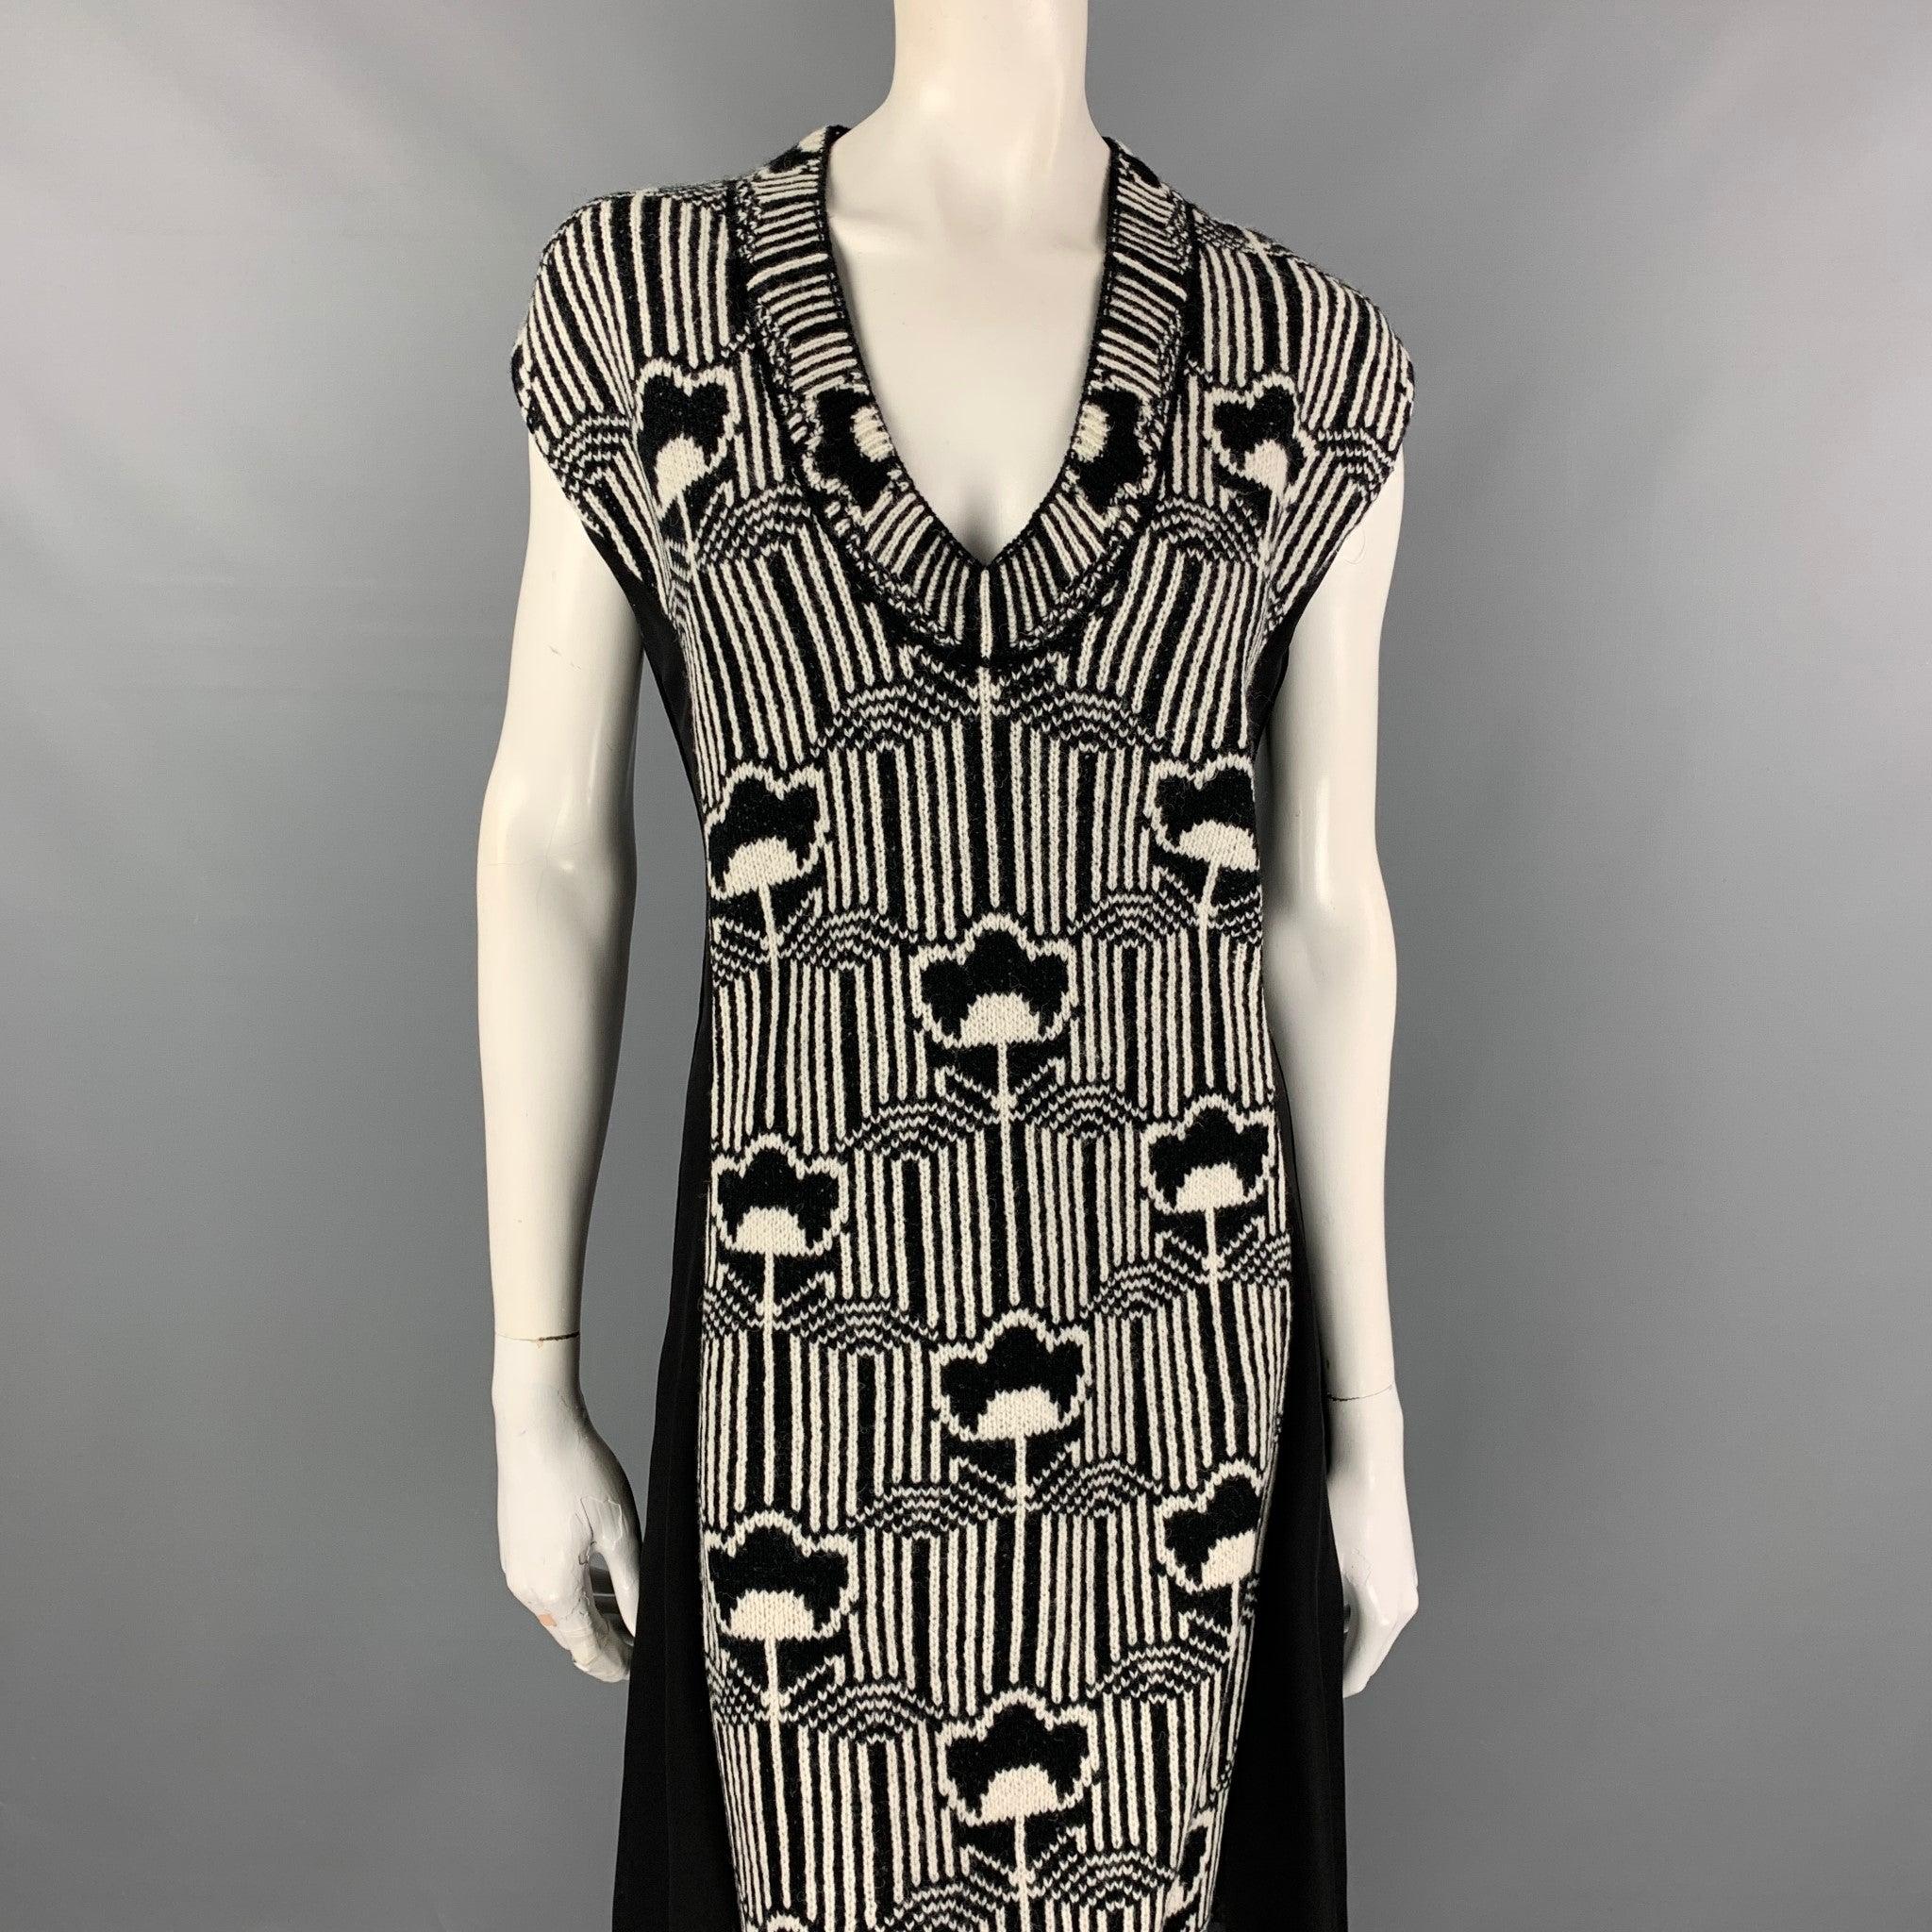 PRADA Fall '21 dress comes in a black & white floral crepe jacquard knit wool / silk featuring pleated chiffon panel sides, slip on, sleeveless, and a v-neck. Made in Italy.
Brand New.
 

Marked:   38 

Measurements: 
 
Shoulder: 17 inches Bust: 38